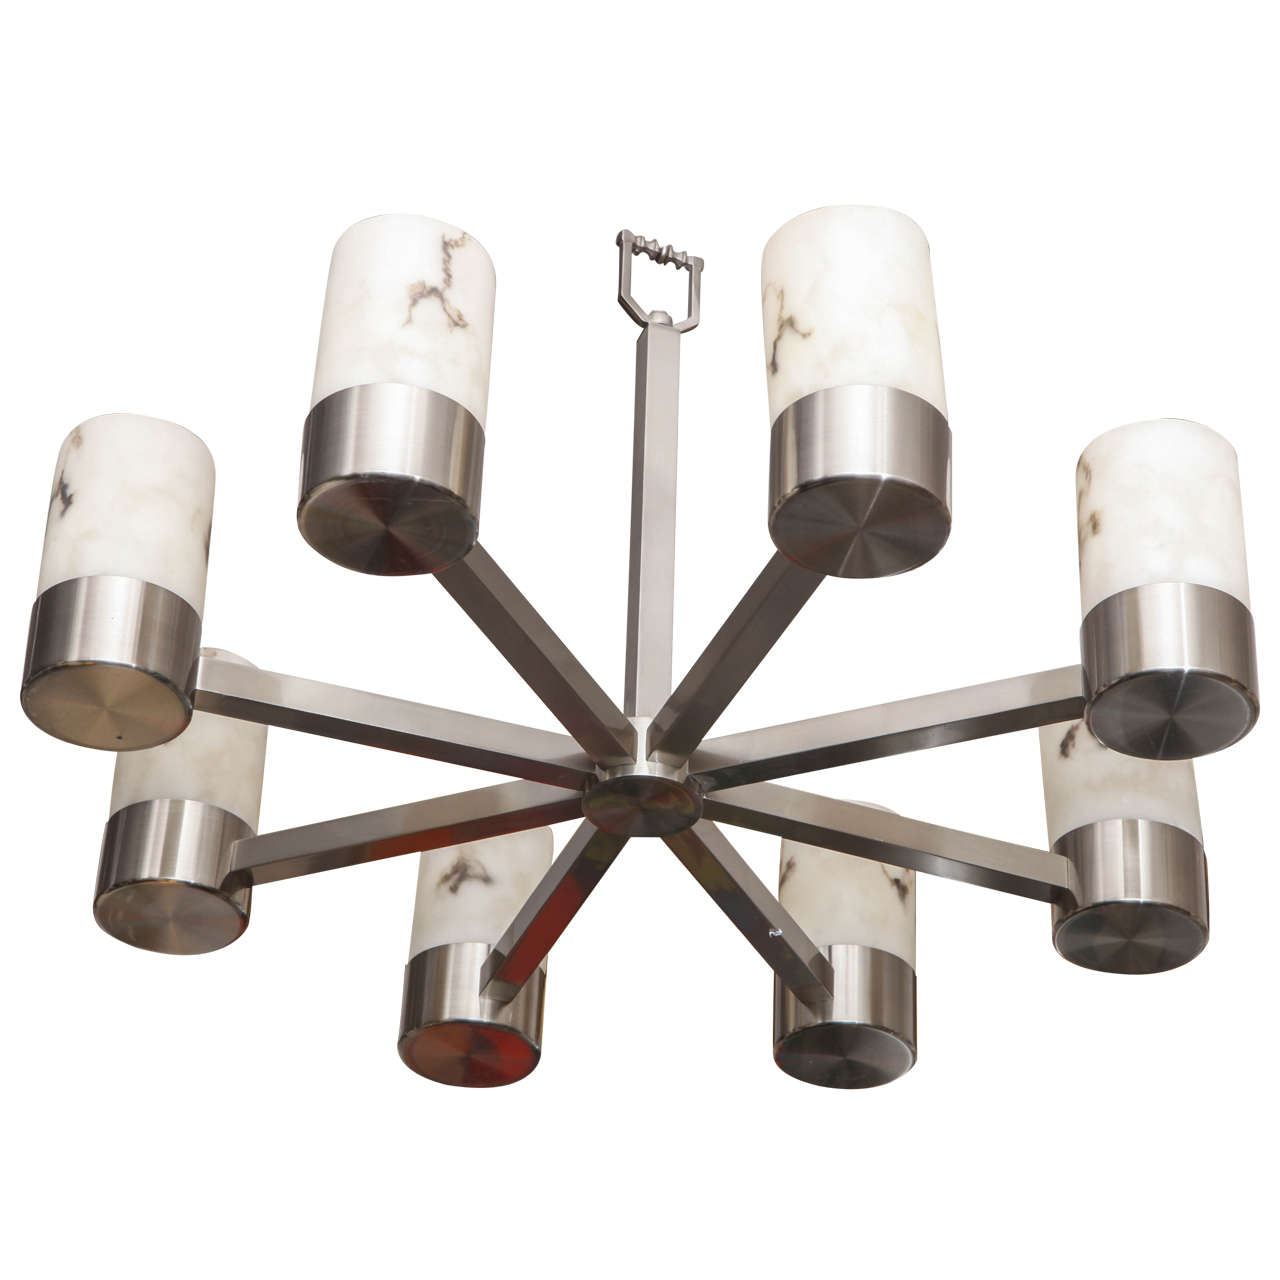 1970s Architectural Modernist Ceiling Fixture of Polished Nickel and Alabaster